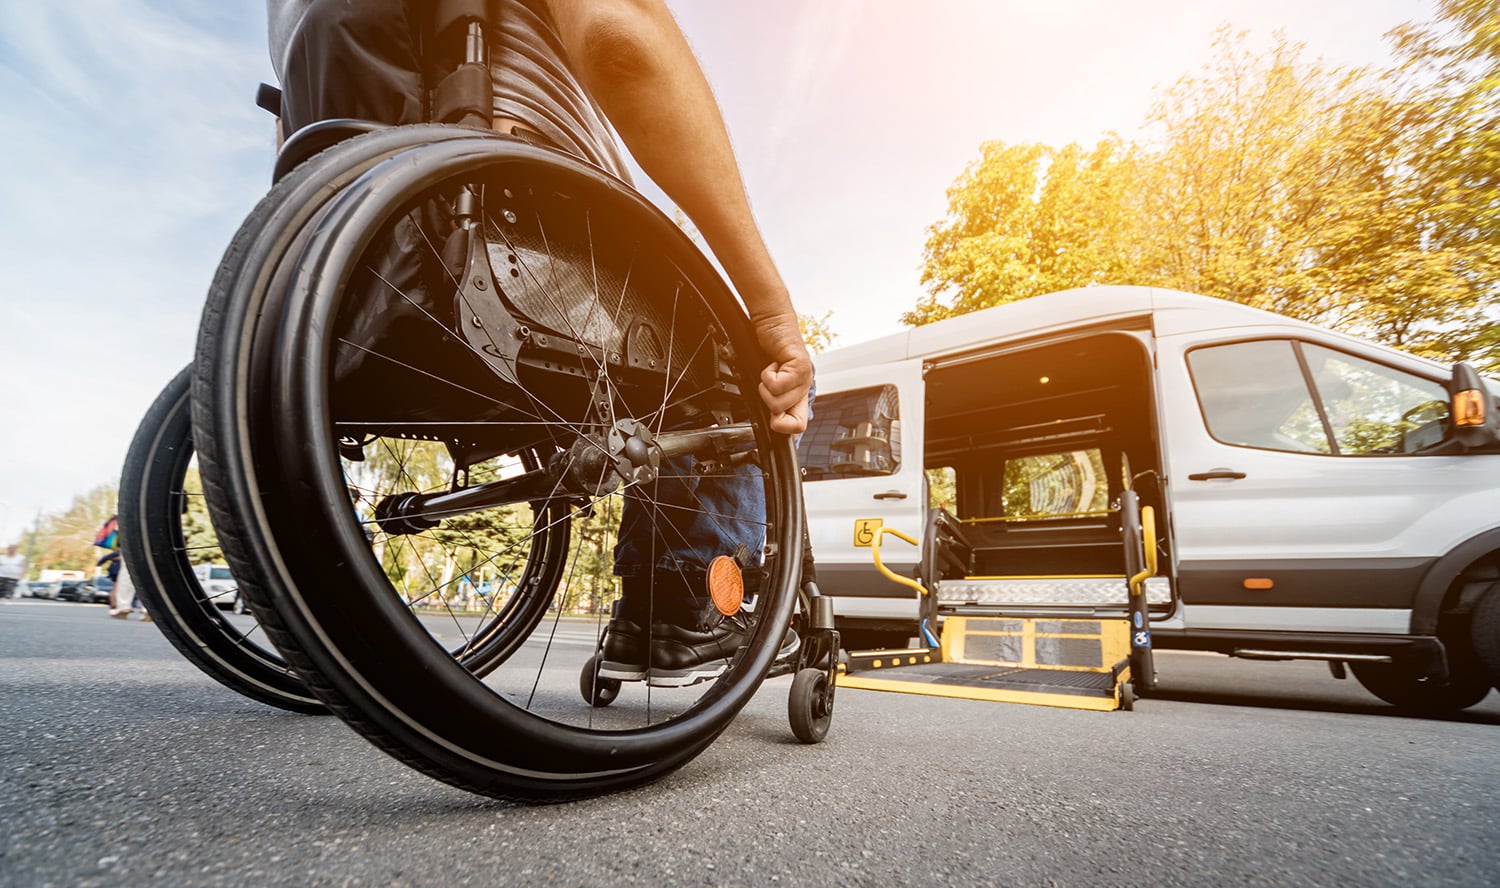 A person in a wheelchair approaches an accessible van with an open ramp on a sunny day.